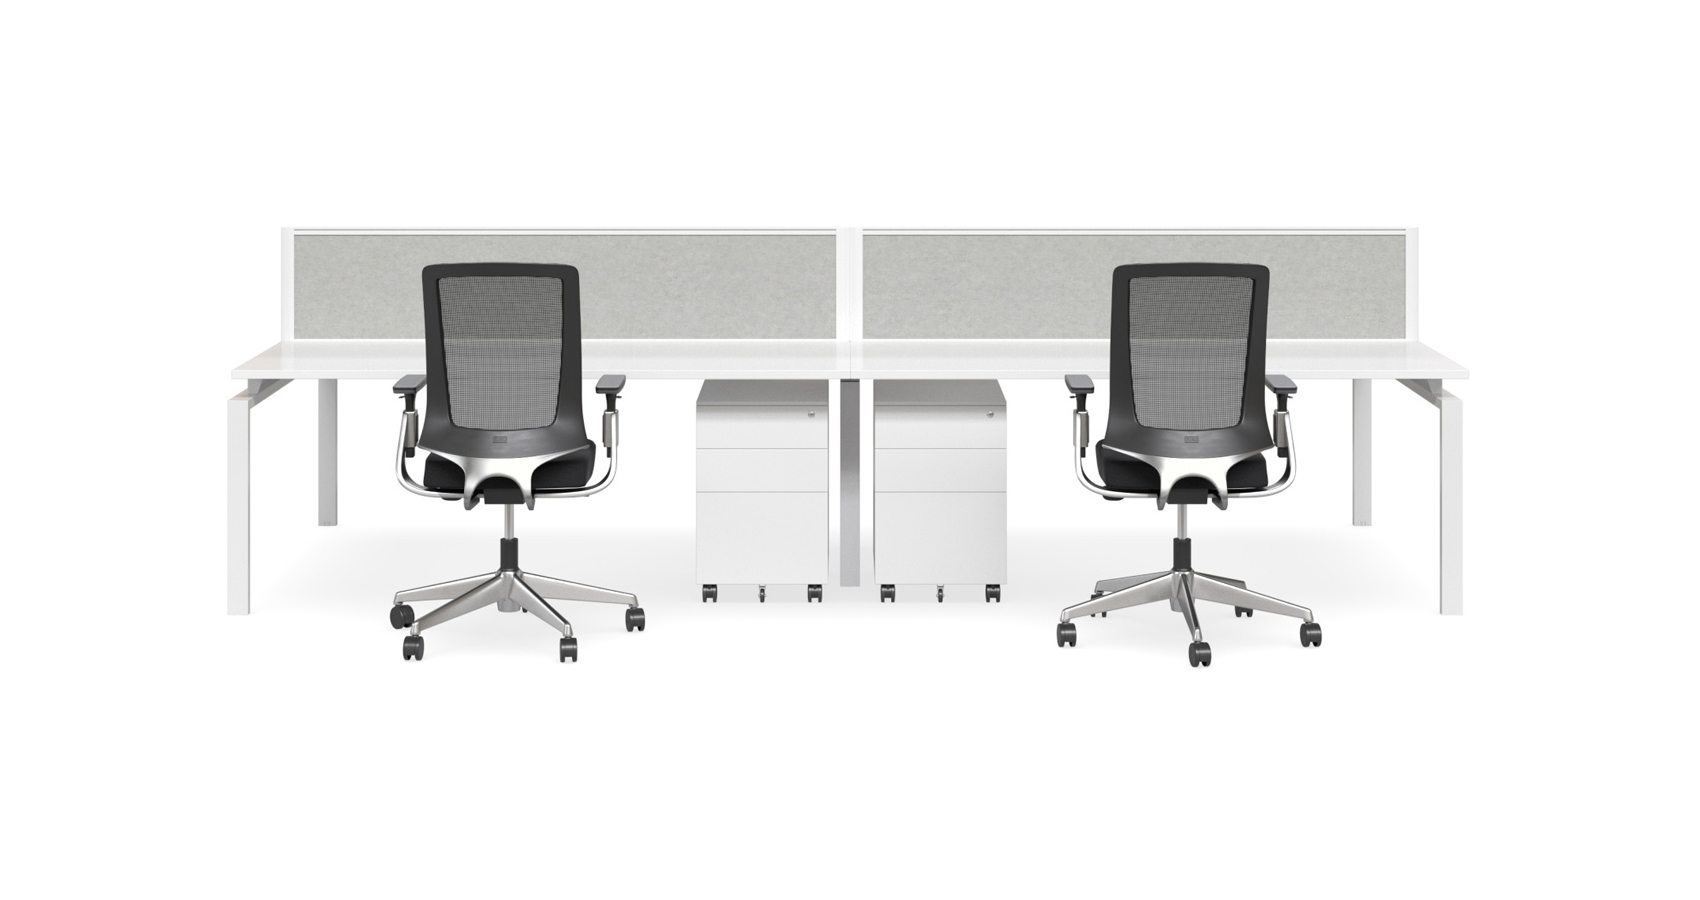 Benchwork 4 Way Double Sided Screenwork Acoustic